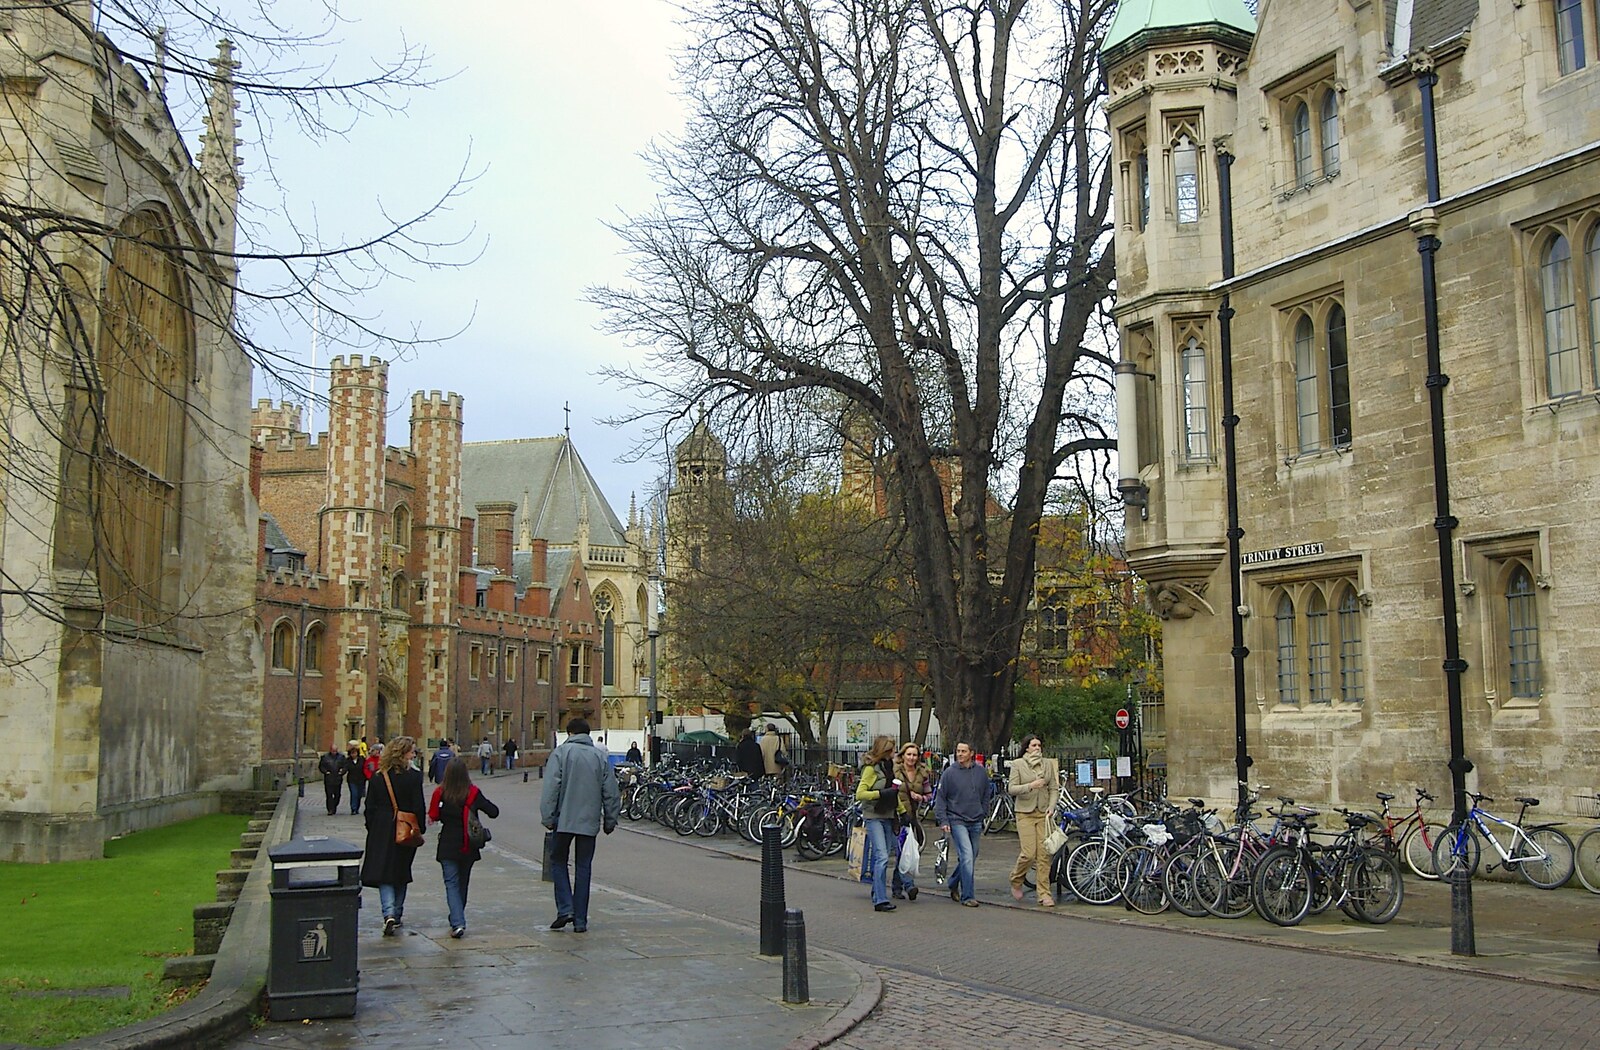 Trinity Street, and St. John's entrance from Autumn Colleges: a Wander around The Backs, Cambridge - 26th November